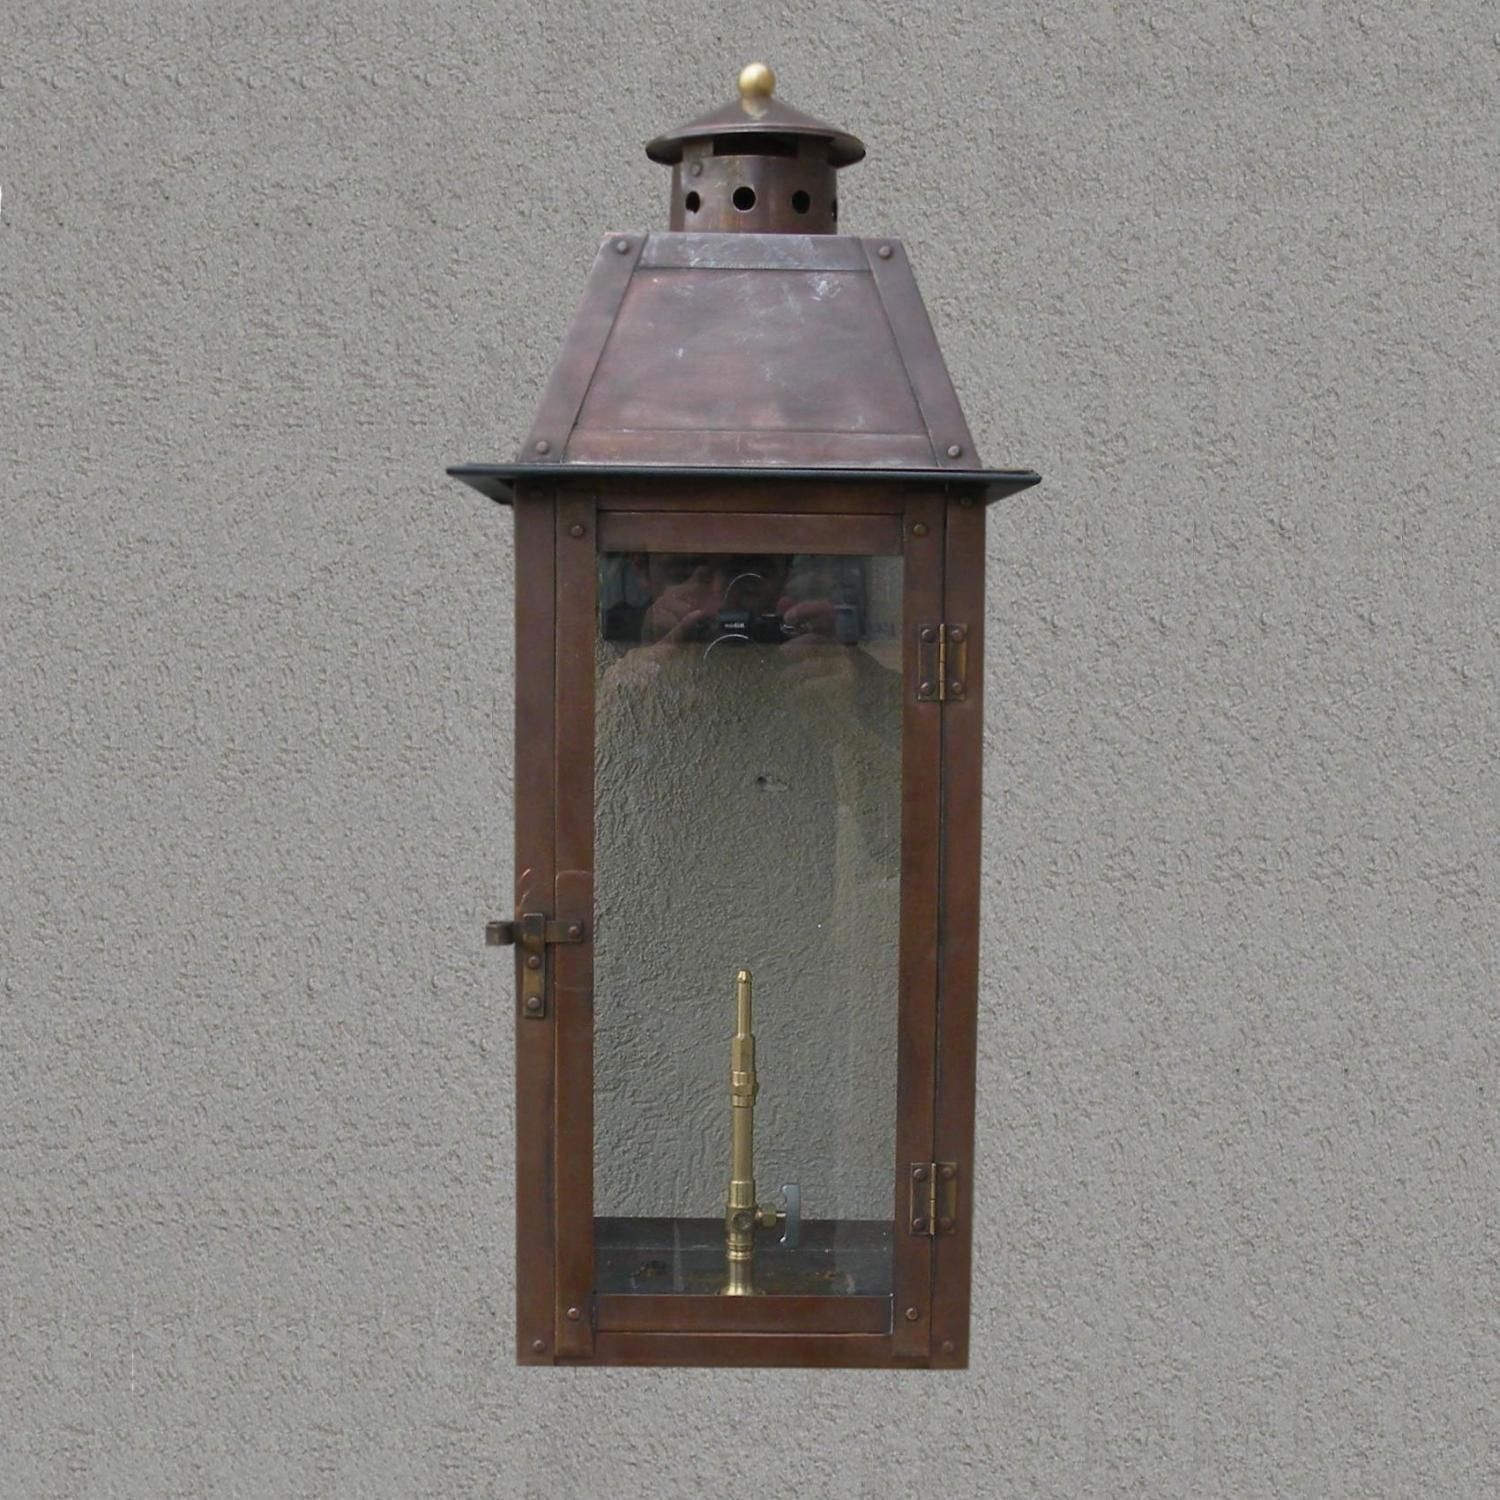 Regency Gl25 Monroe Rue Natural Gas Light With Open Flame Burner And In Outdoor Gas Lanterns (View 11 of 20)